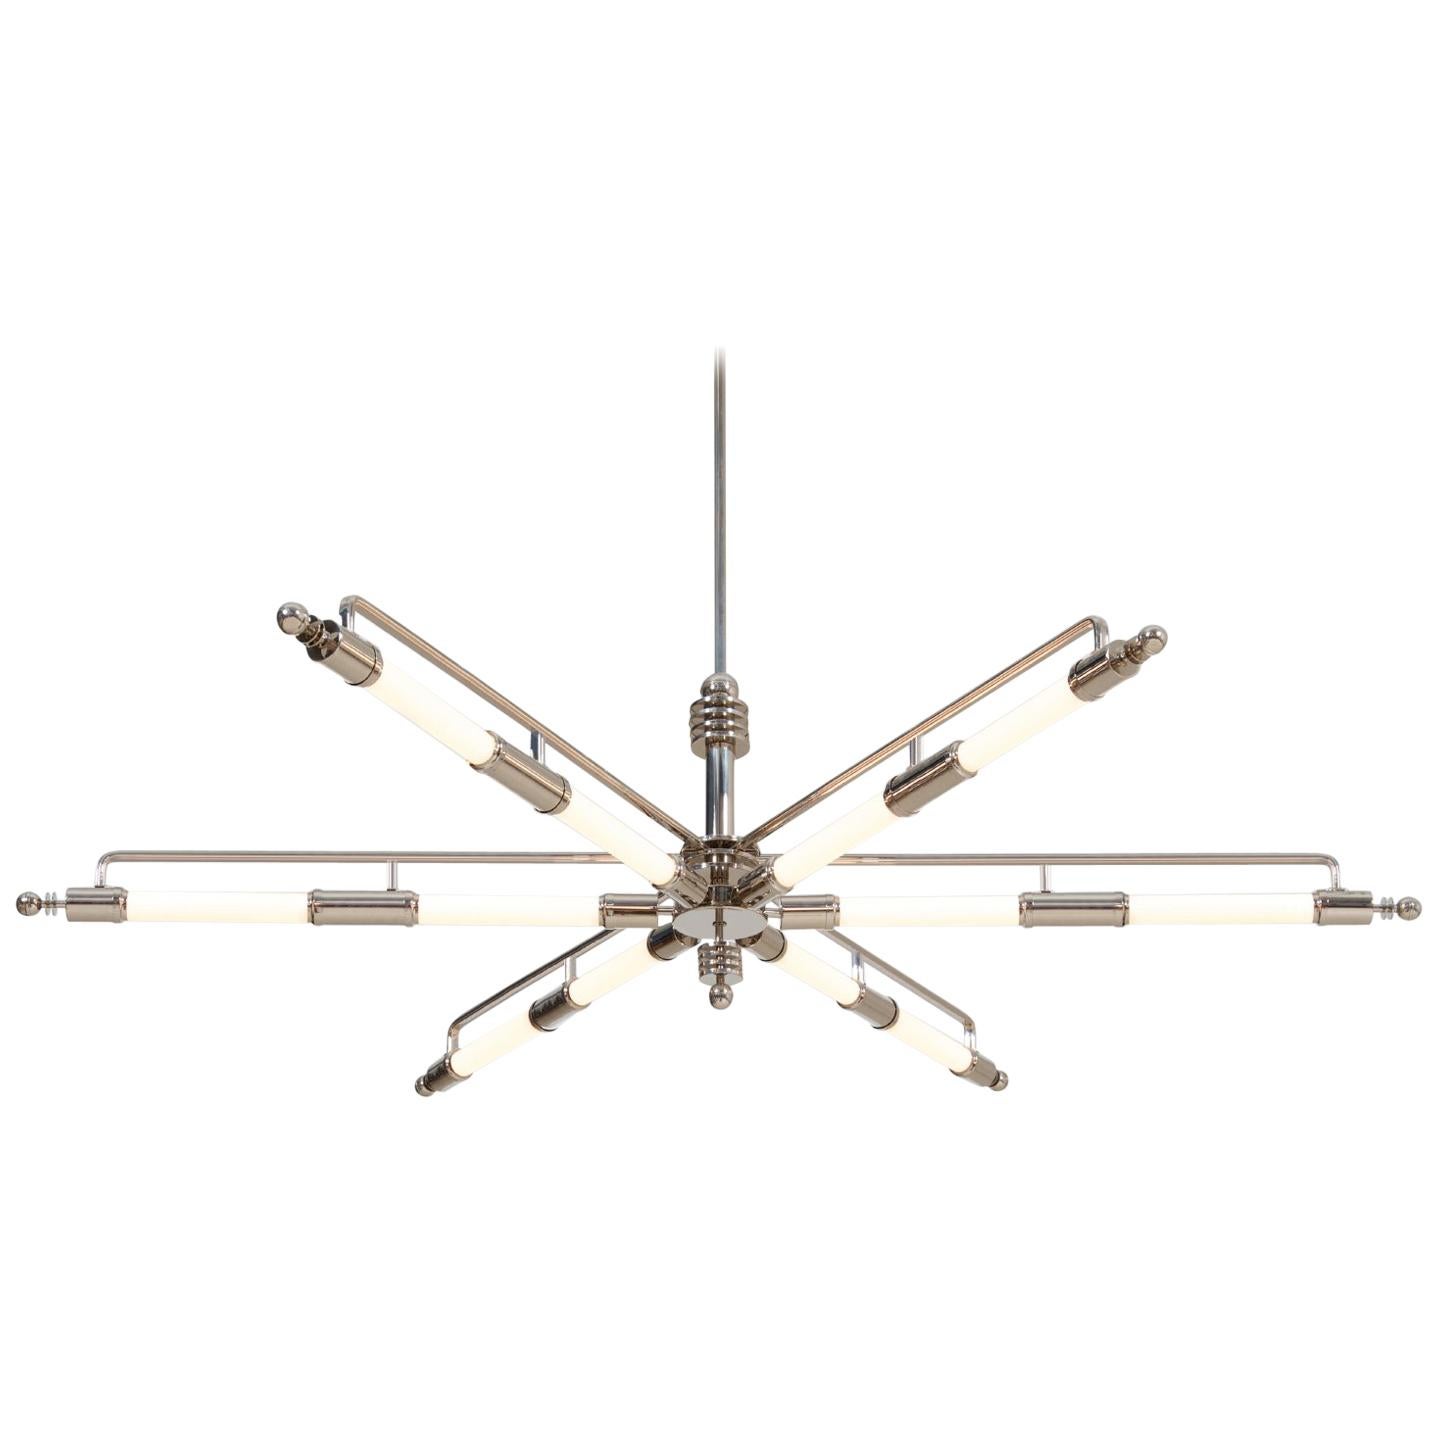 Large Machine Age Chandelier with 6 Arms, Nickel-Plated Brass, Customizable For Sale